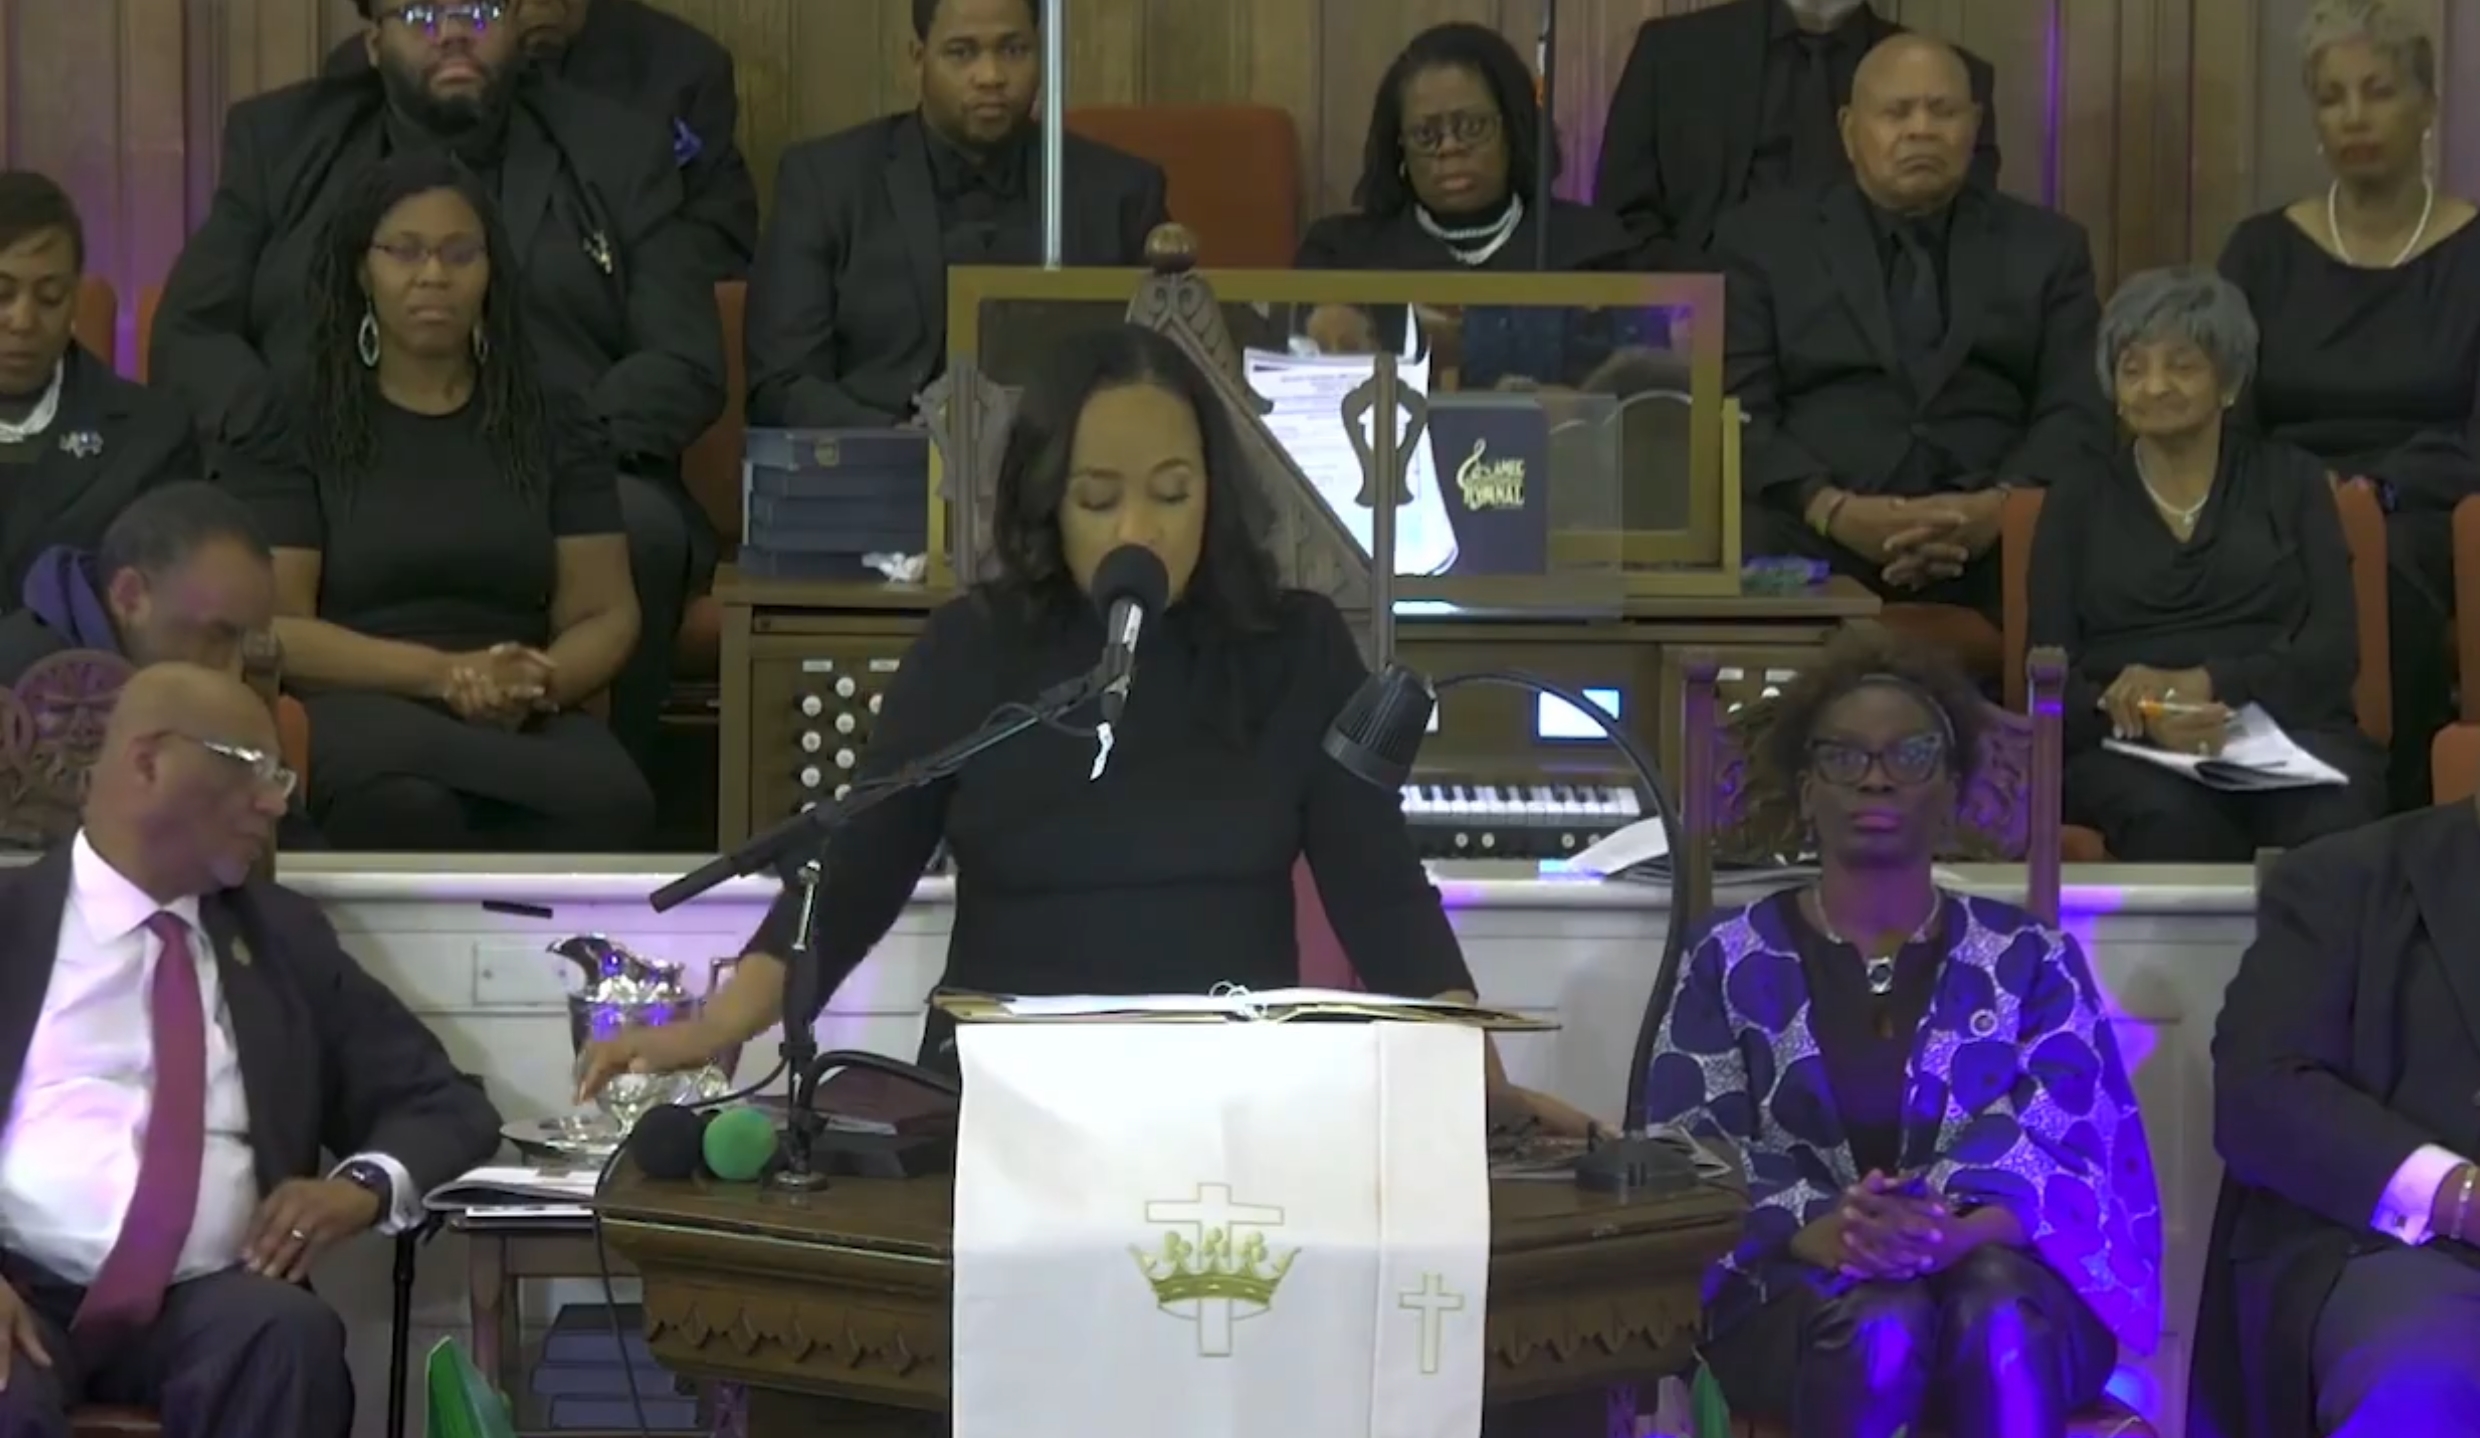 📺 ‘Filled with hate’: Watch Fani Willis call out Marjorie Taylor Greene during church sermon (rawstory.com)